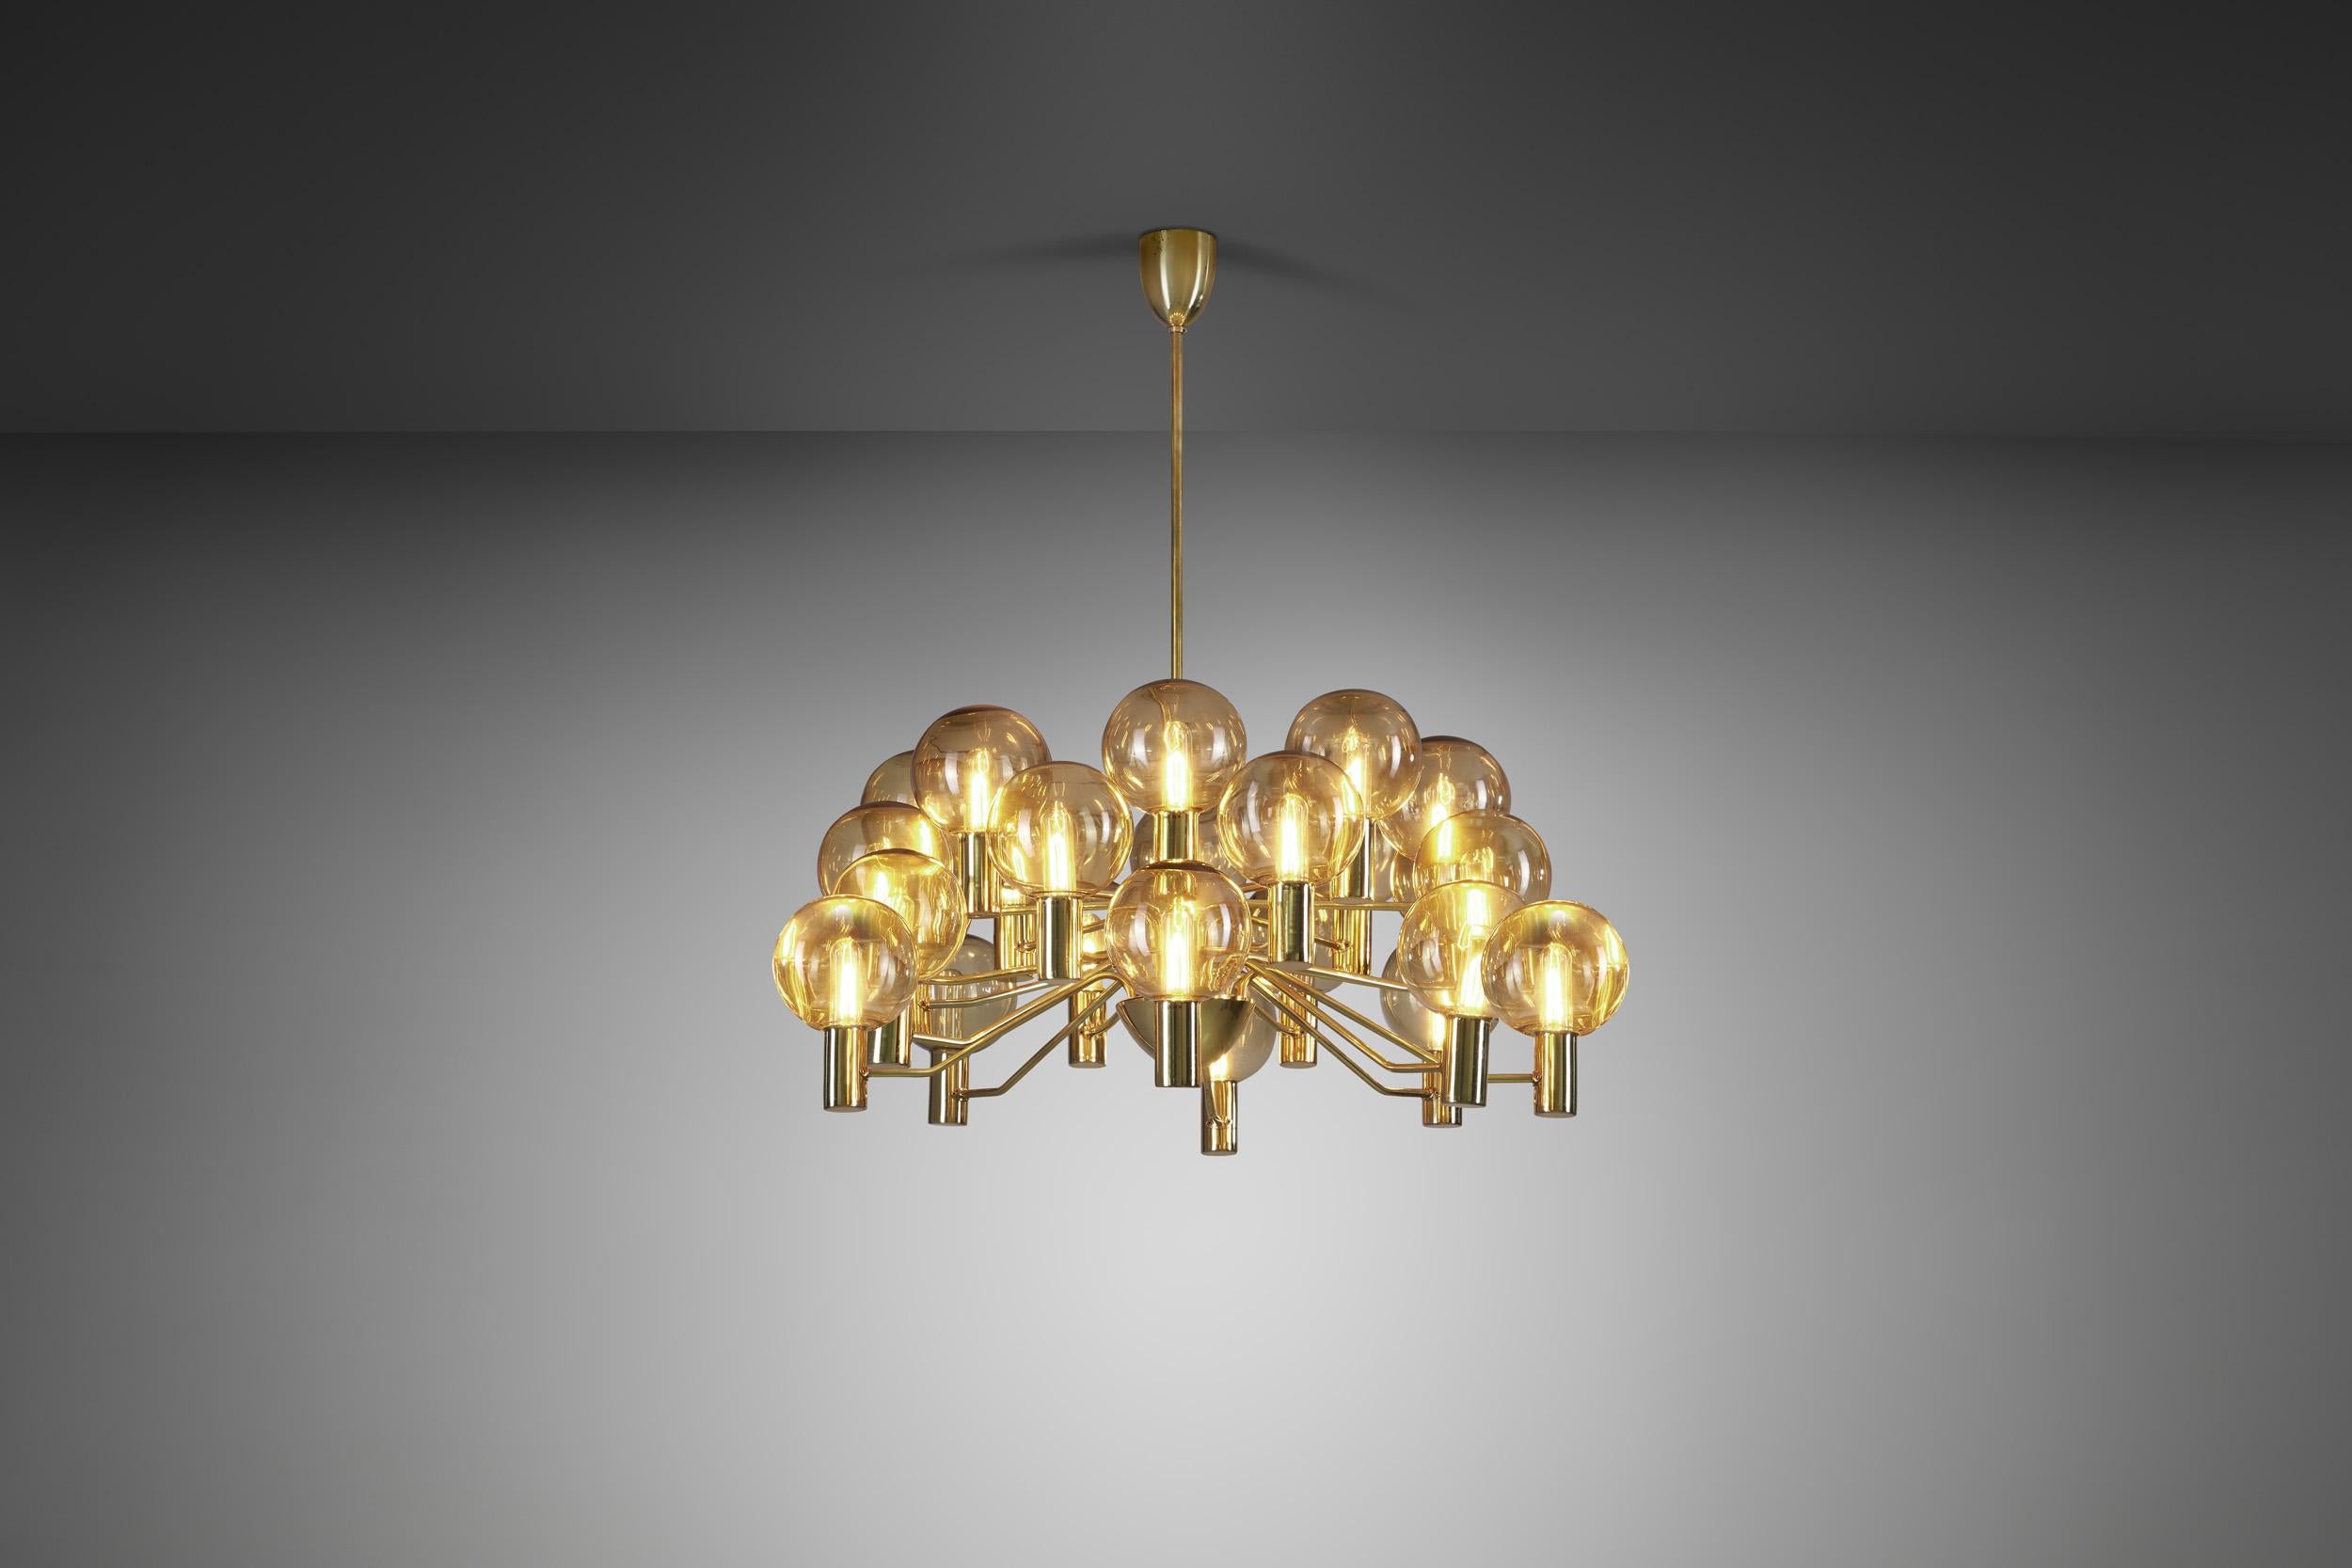 This marvellous, brass twelve-light chandelier was created in what we now call “the golden age of Scandinavian design”. Hans-Agne Jakobsson was the great Swedish master of lighting, designing some of the most recognizable mid-century modern lamps of